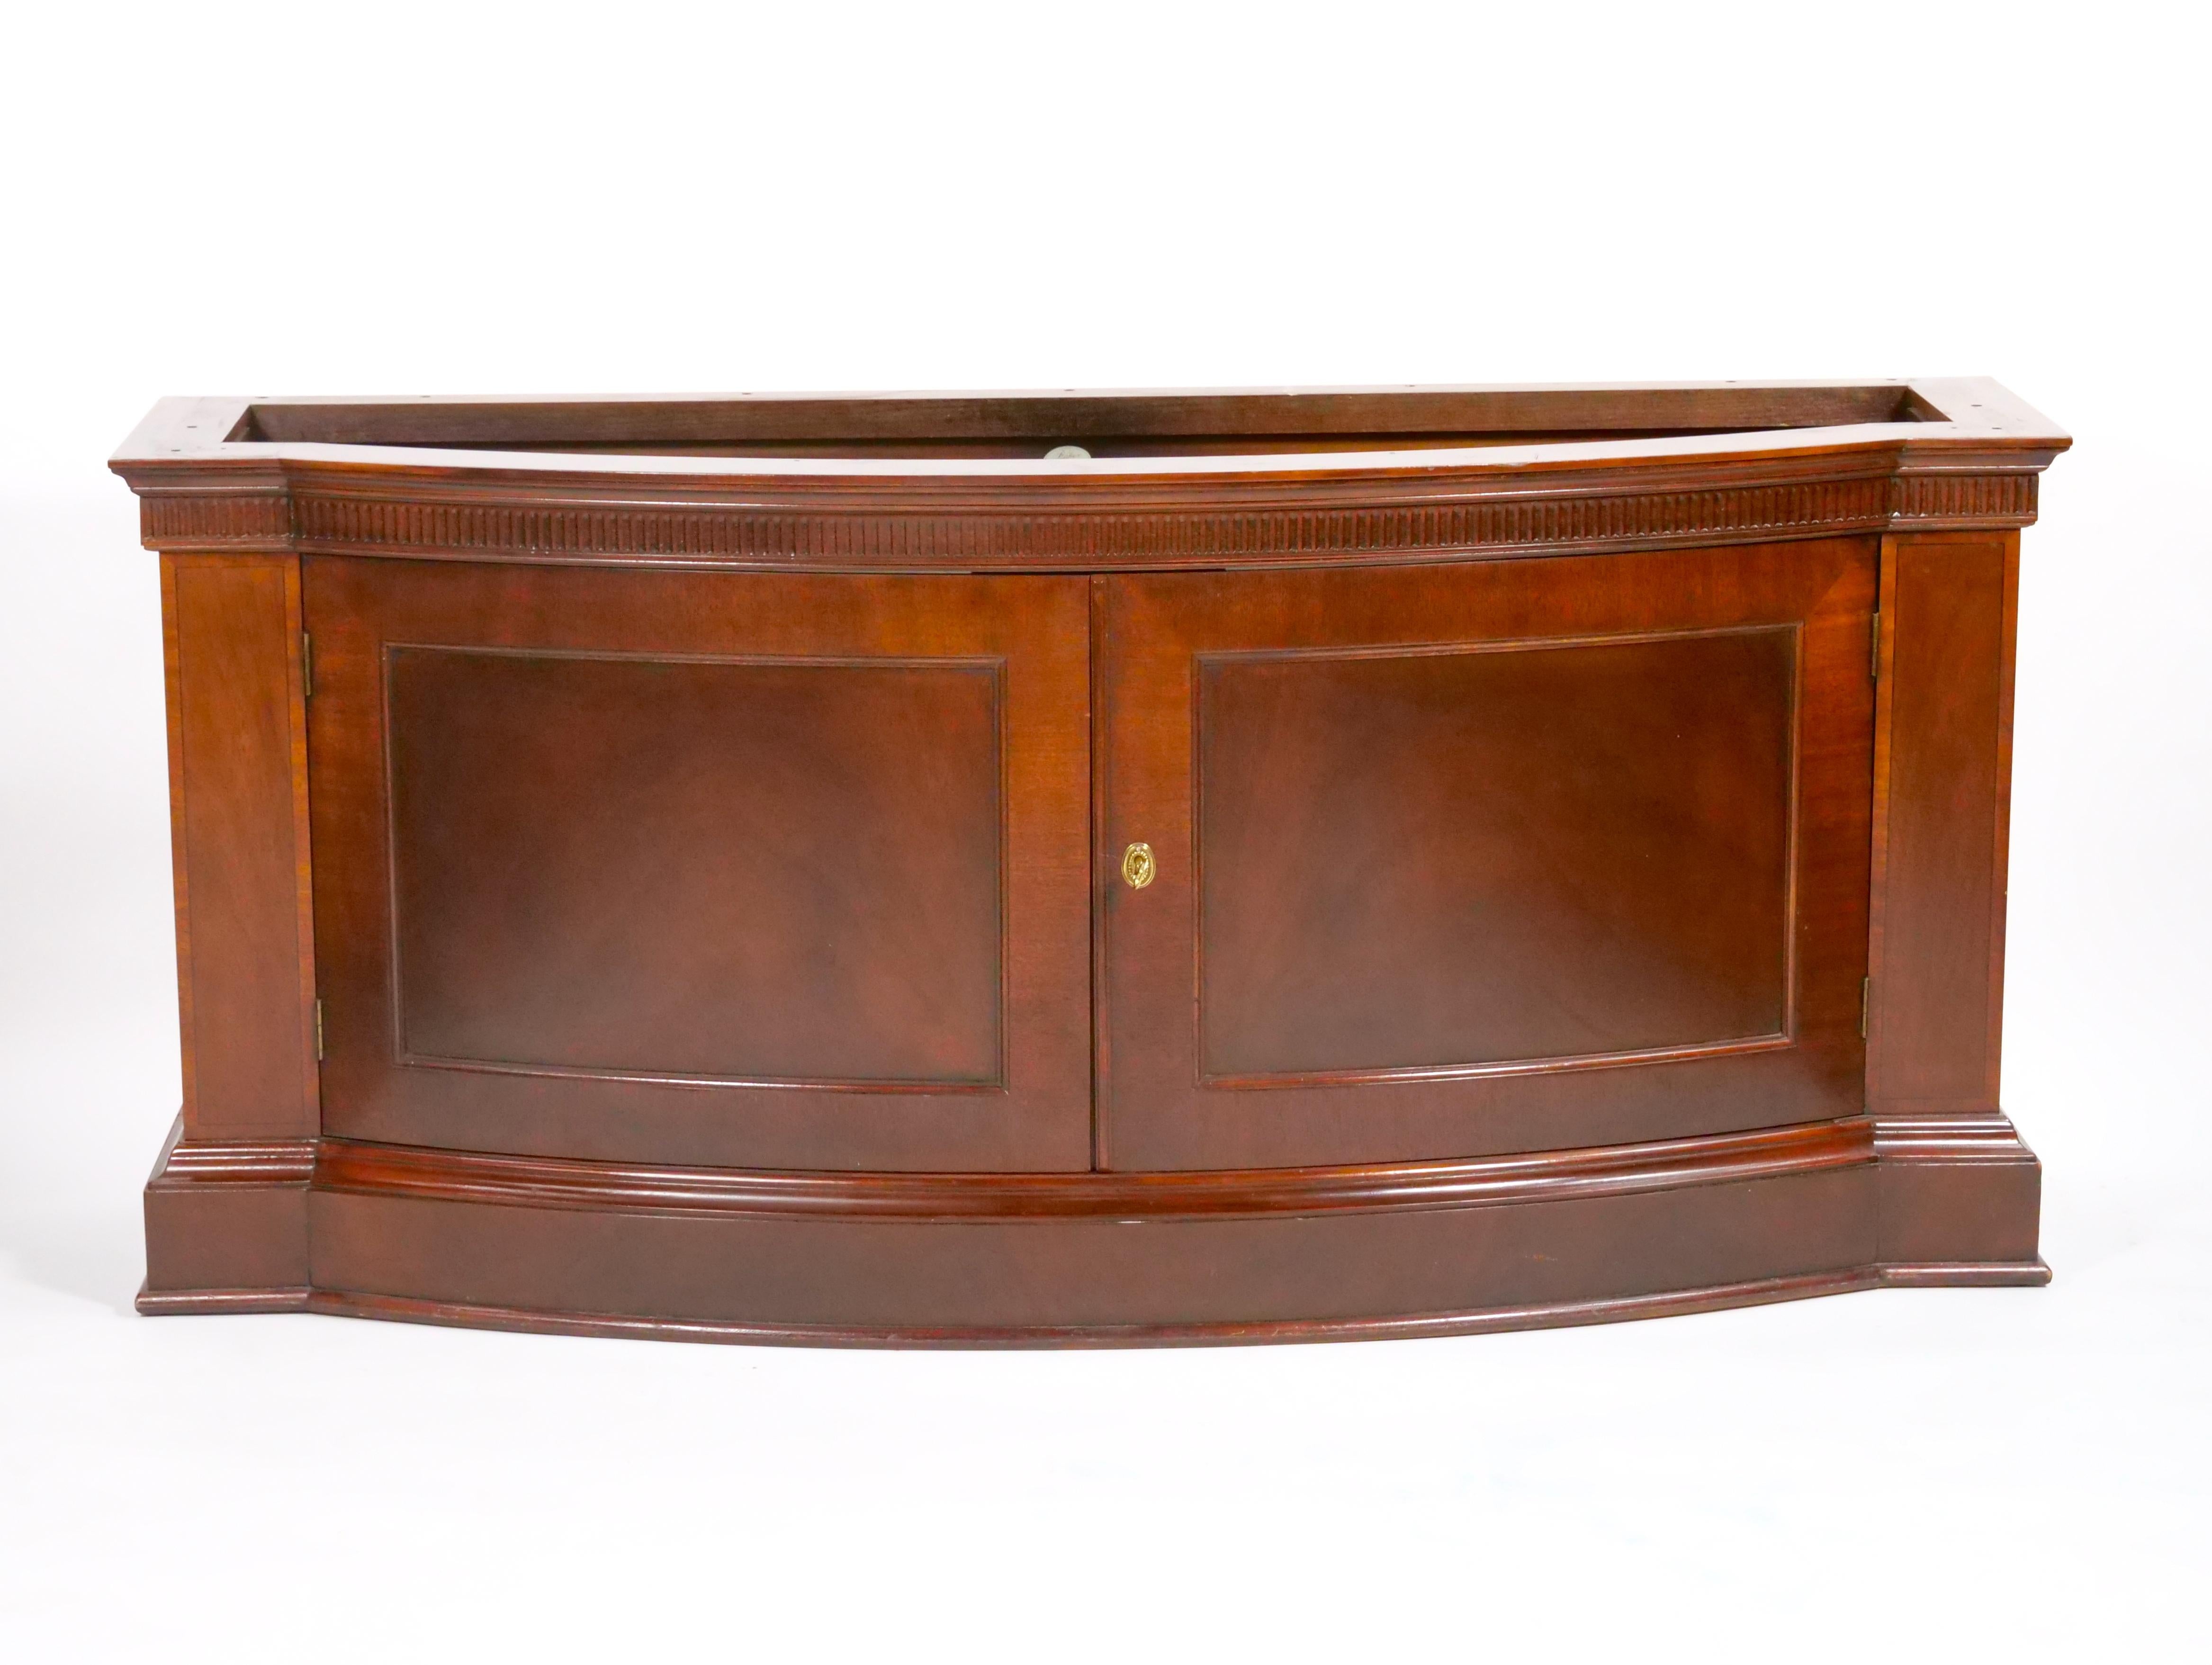 American Classical Early 20th Century  Mahogany Wood Demilune Shape Historical Charleston Cabinet For Sale